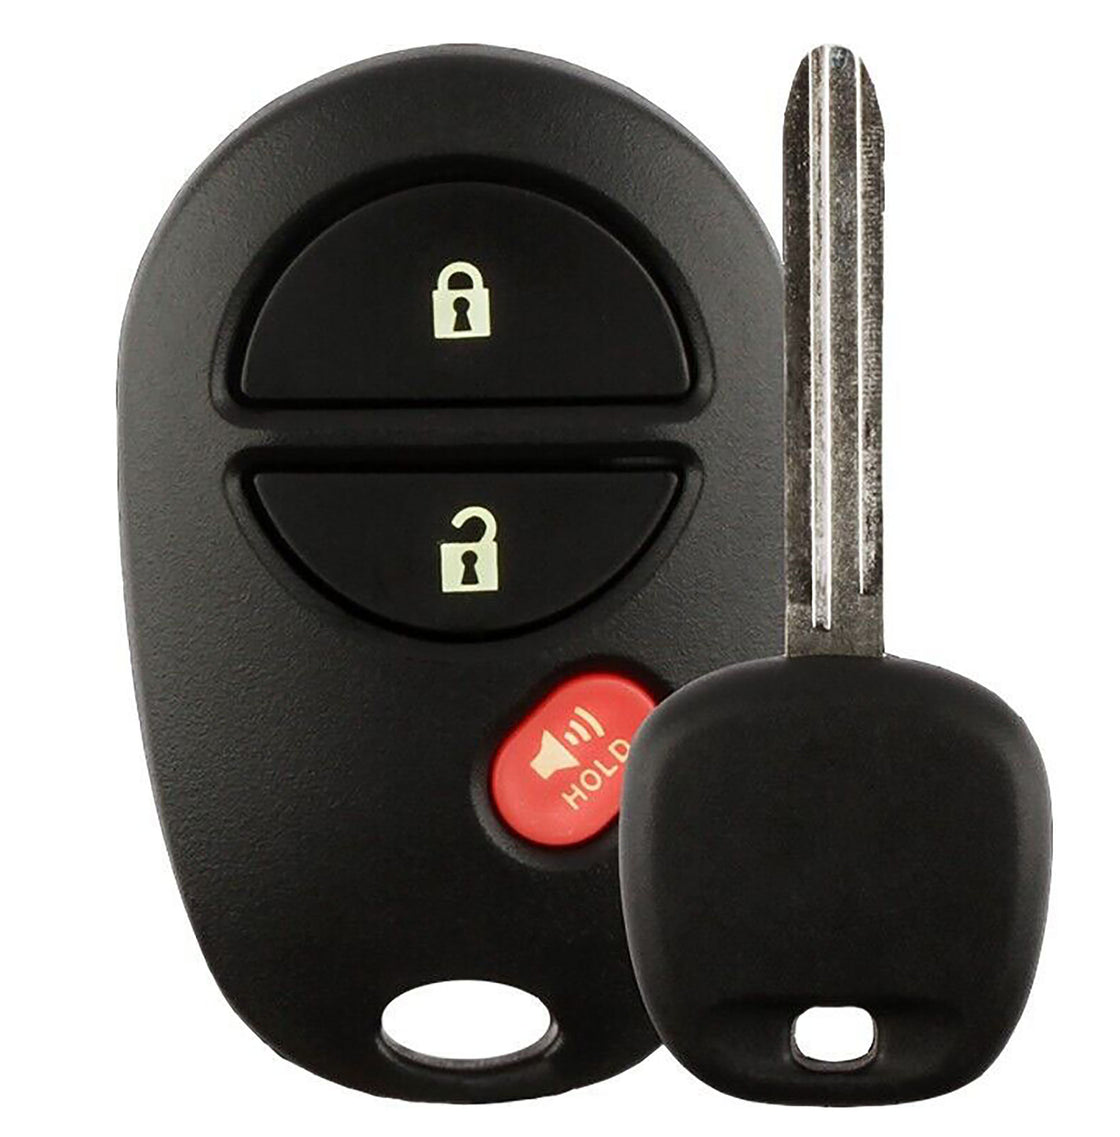 1x New Replacement Transponder Key Remote Compatible with & Fit For Toyota G chip - MPN TOY44G-PT-C-02